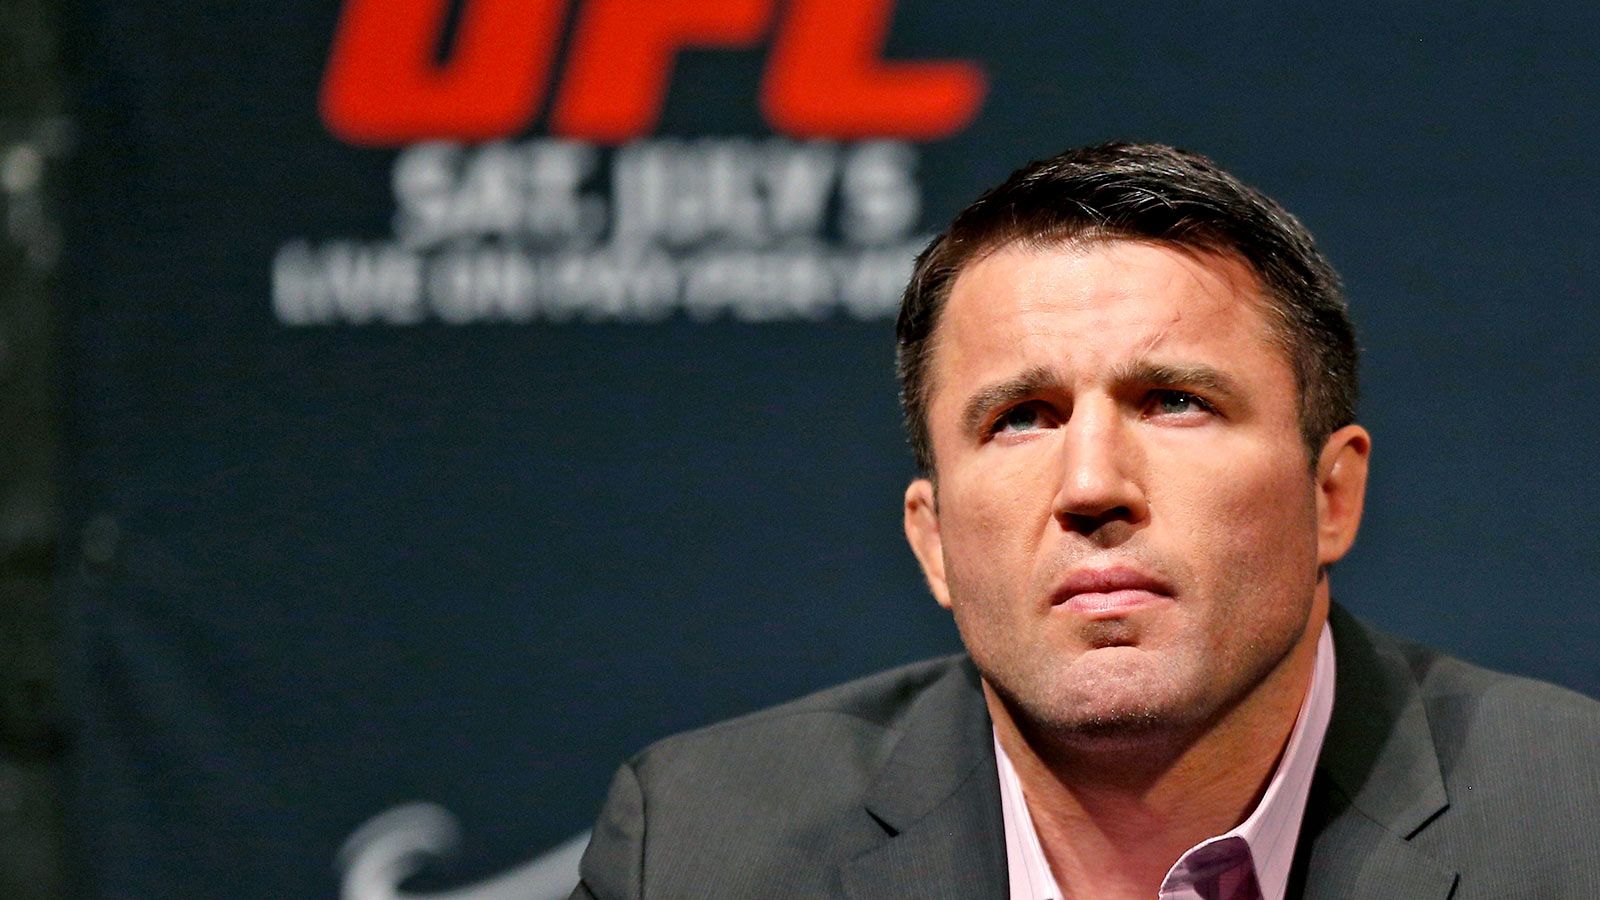 Chael Sonnen explains why the 4th fight between Conor McGregor and Dustin Poirier is not needed